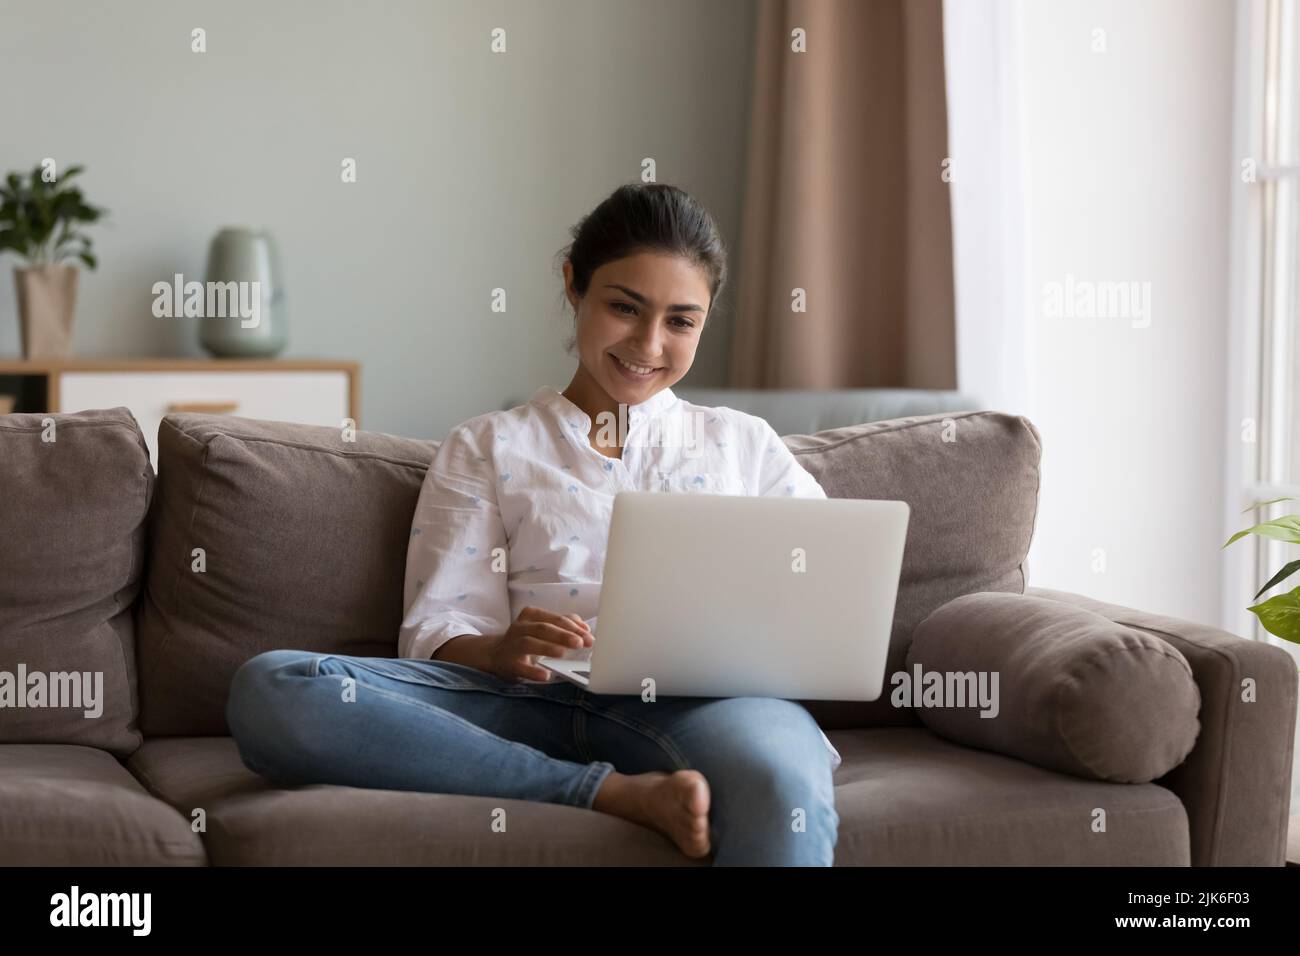 Cheerful young Indian freelance employee woman using online app Stock Photo